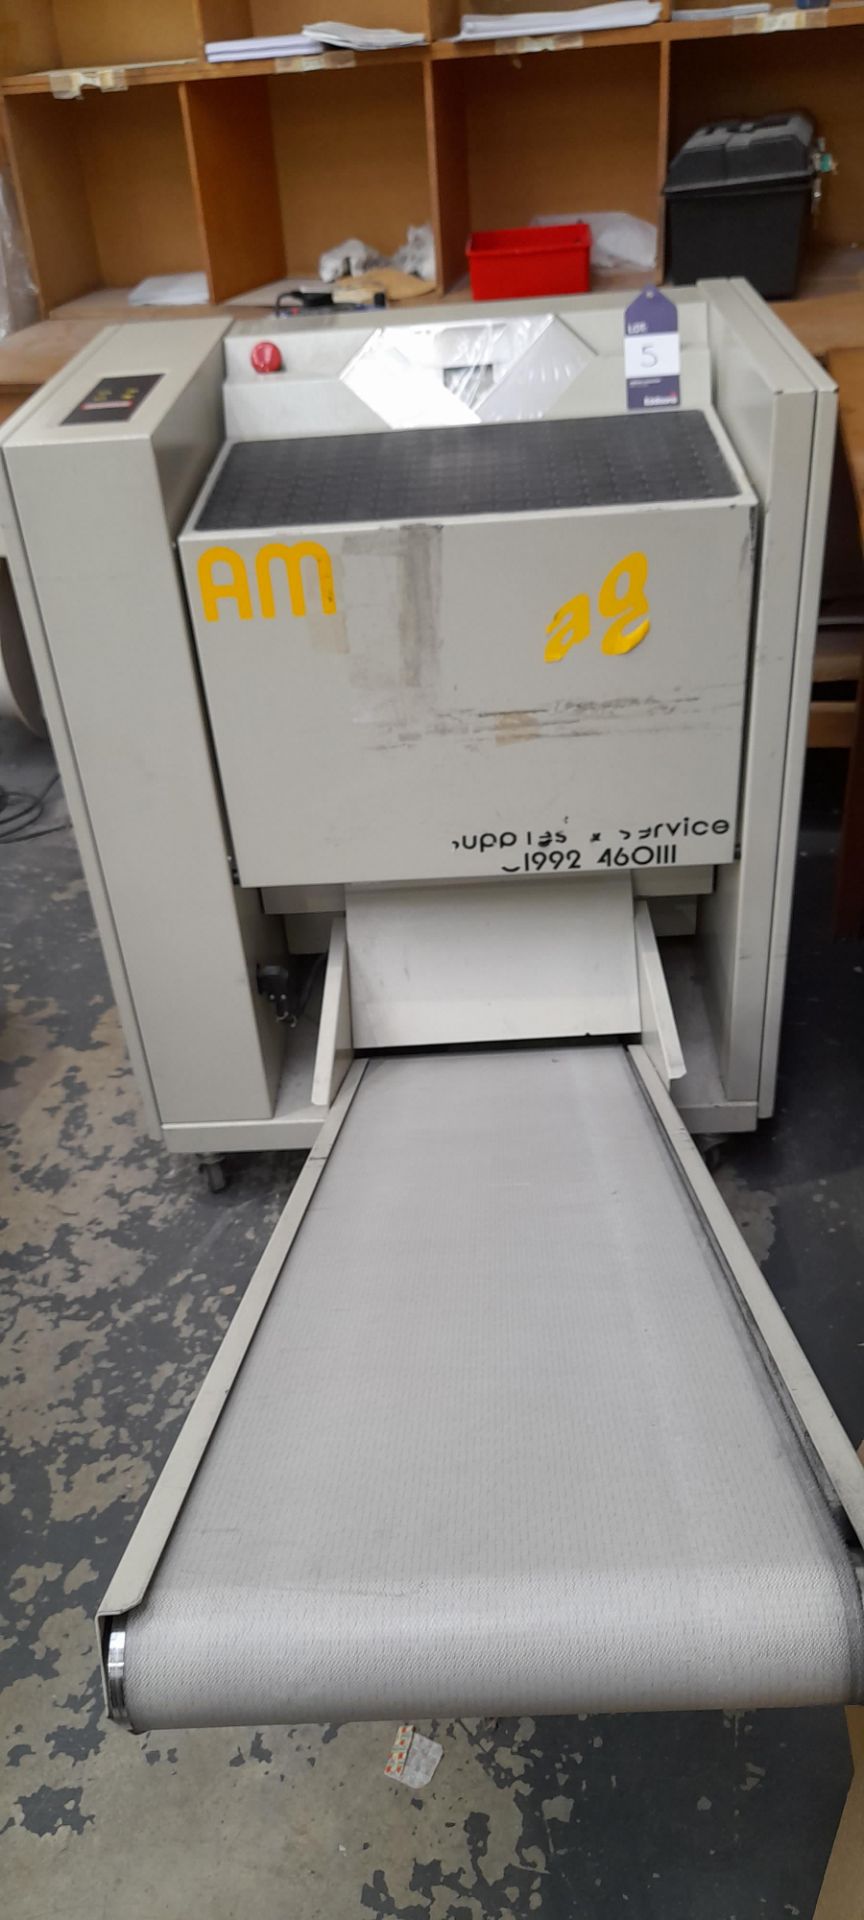 Minipack - Torre SpA hand bagging poly wrapping machine. Model: Mail bag digit, year: 2002, S/N: - Bild 2 aus 6